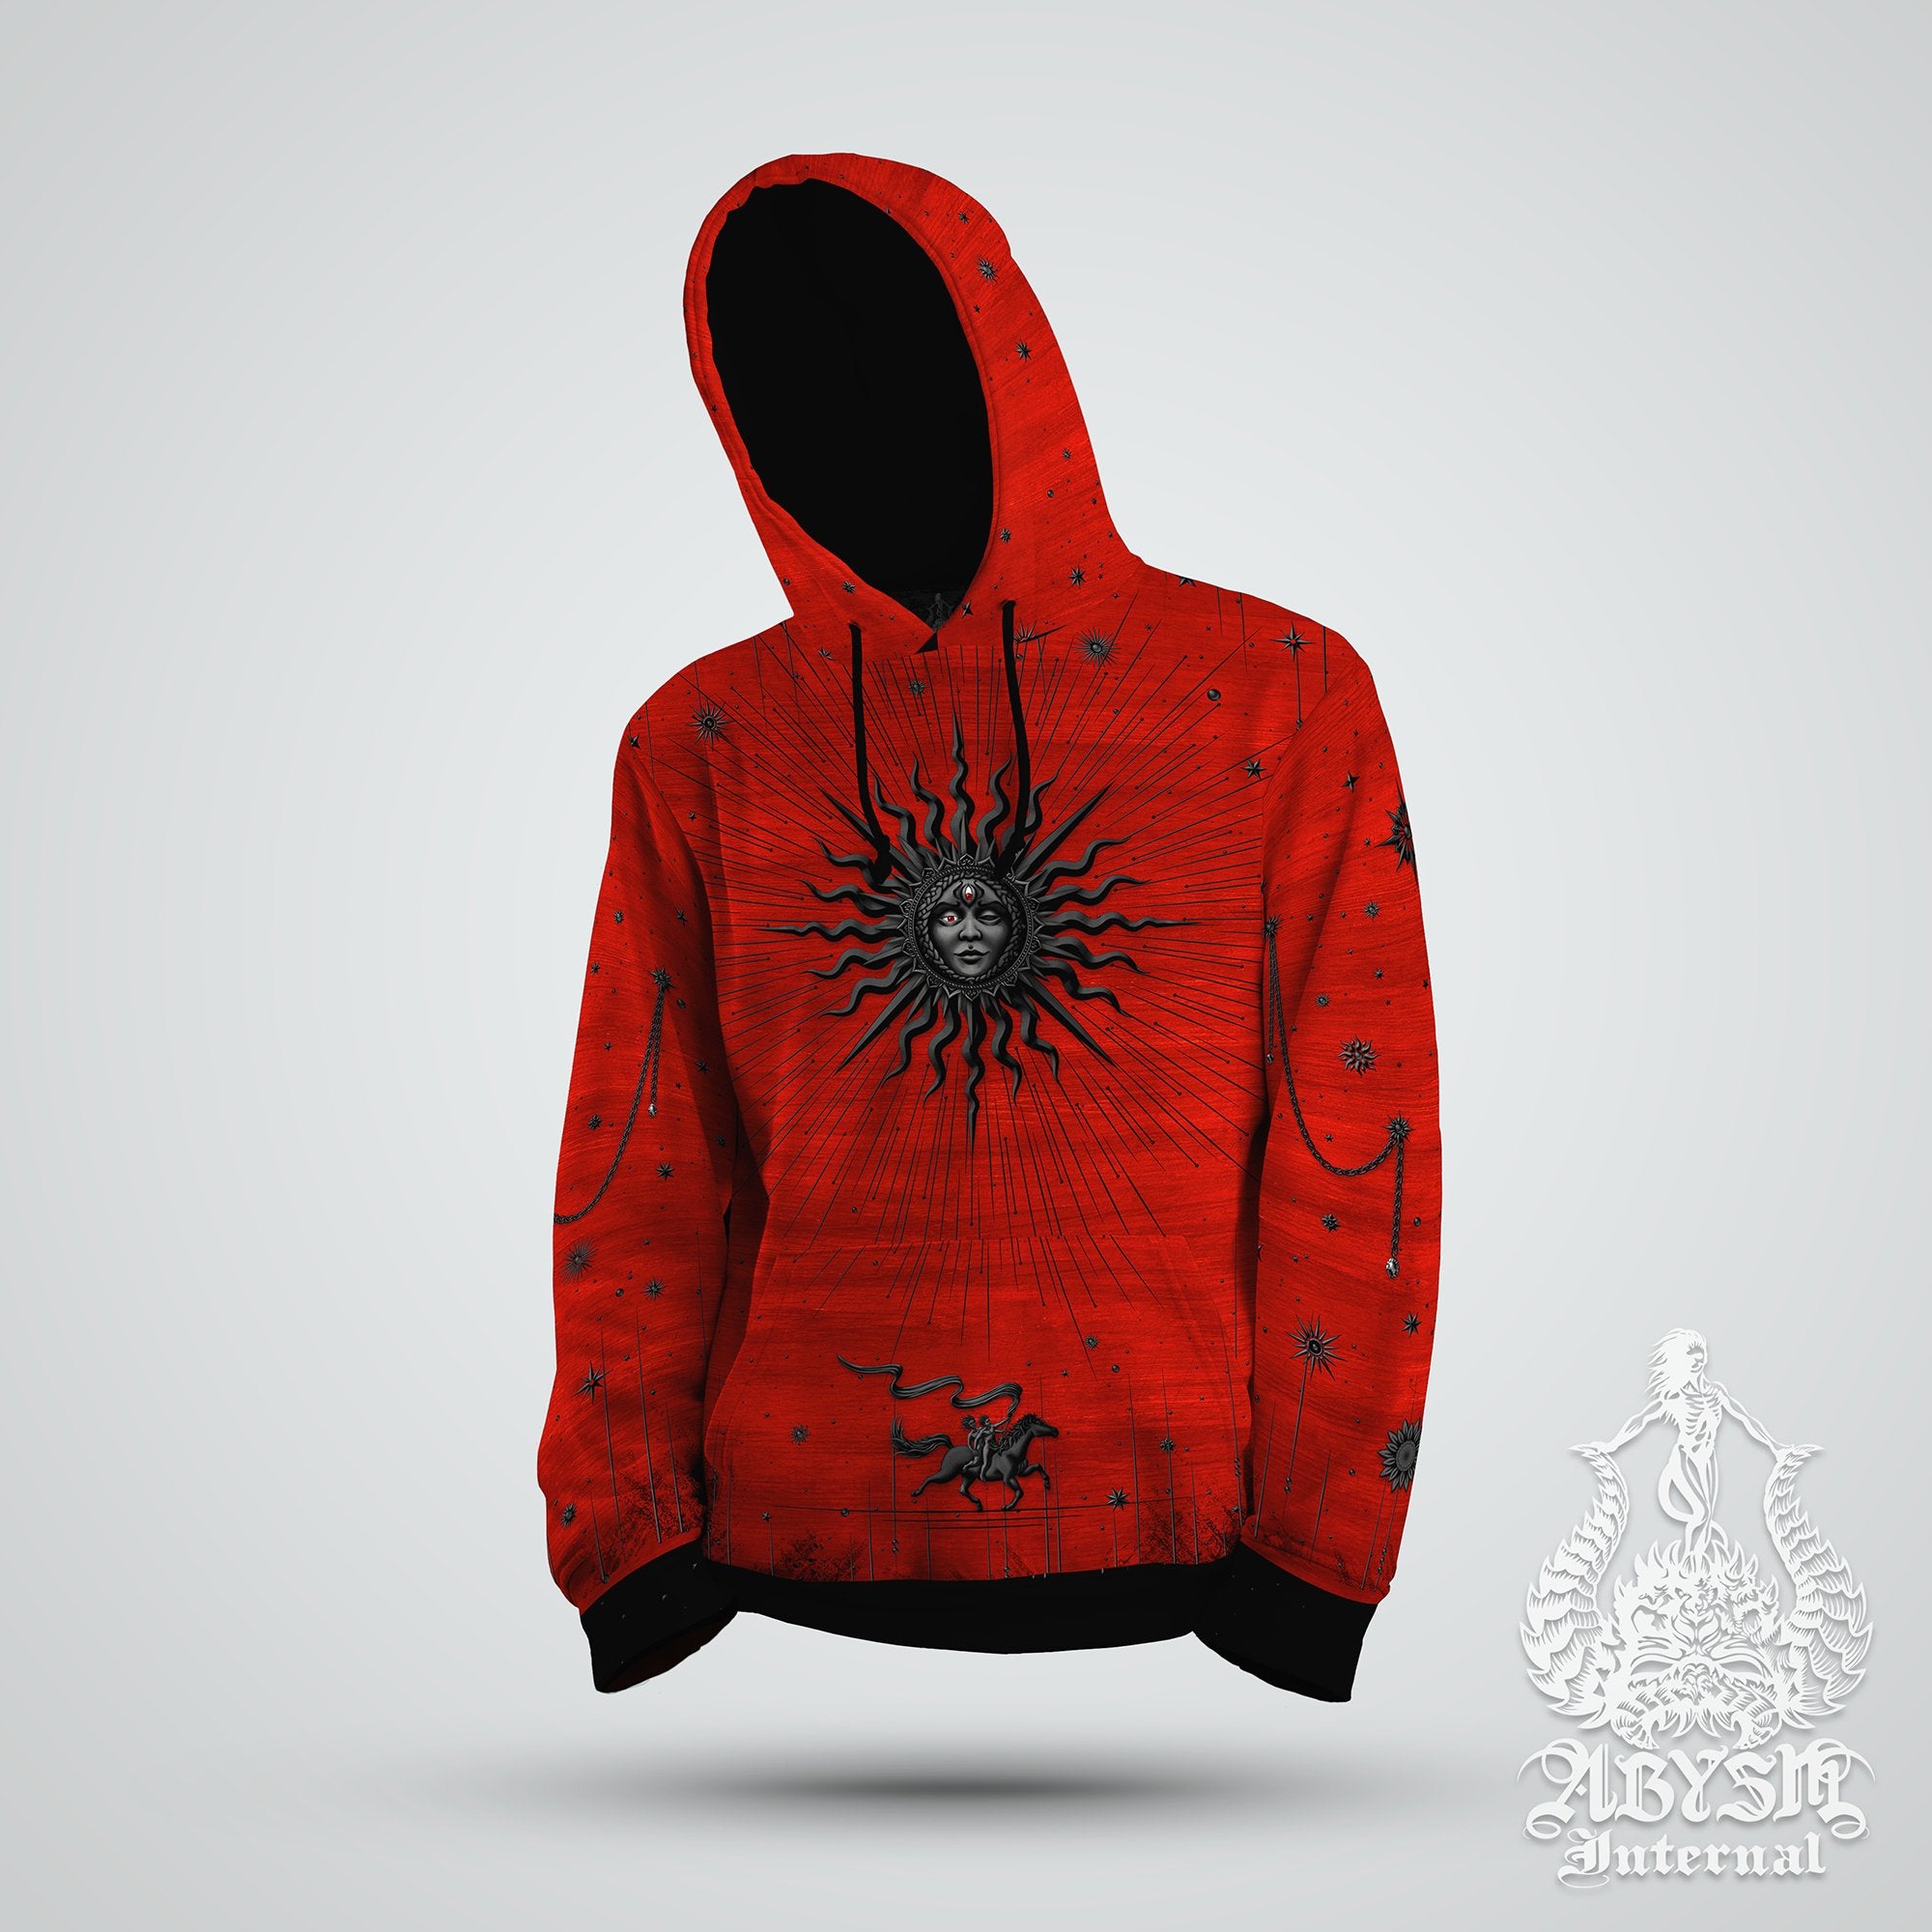 Gothic Black Sun Hoodie, Red Witch Pullover, Wizard Sweater, Bloody Tarot Arcana Outfit, Goth Magic, Esoteric Streetwear, Alternative Clothing, Unisex - Abysm Internal